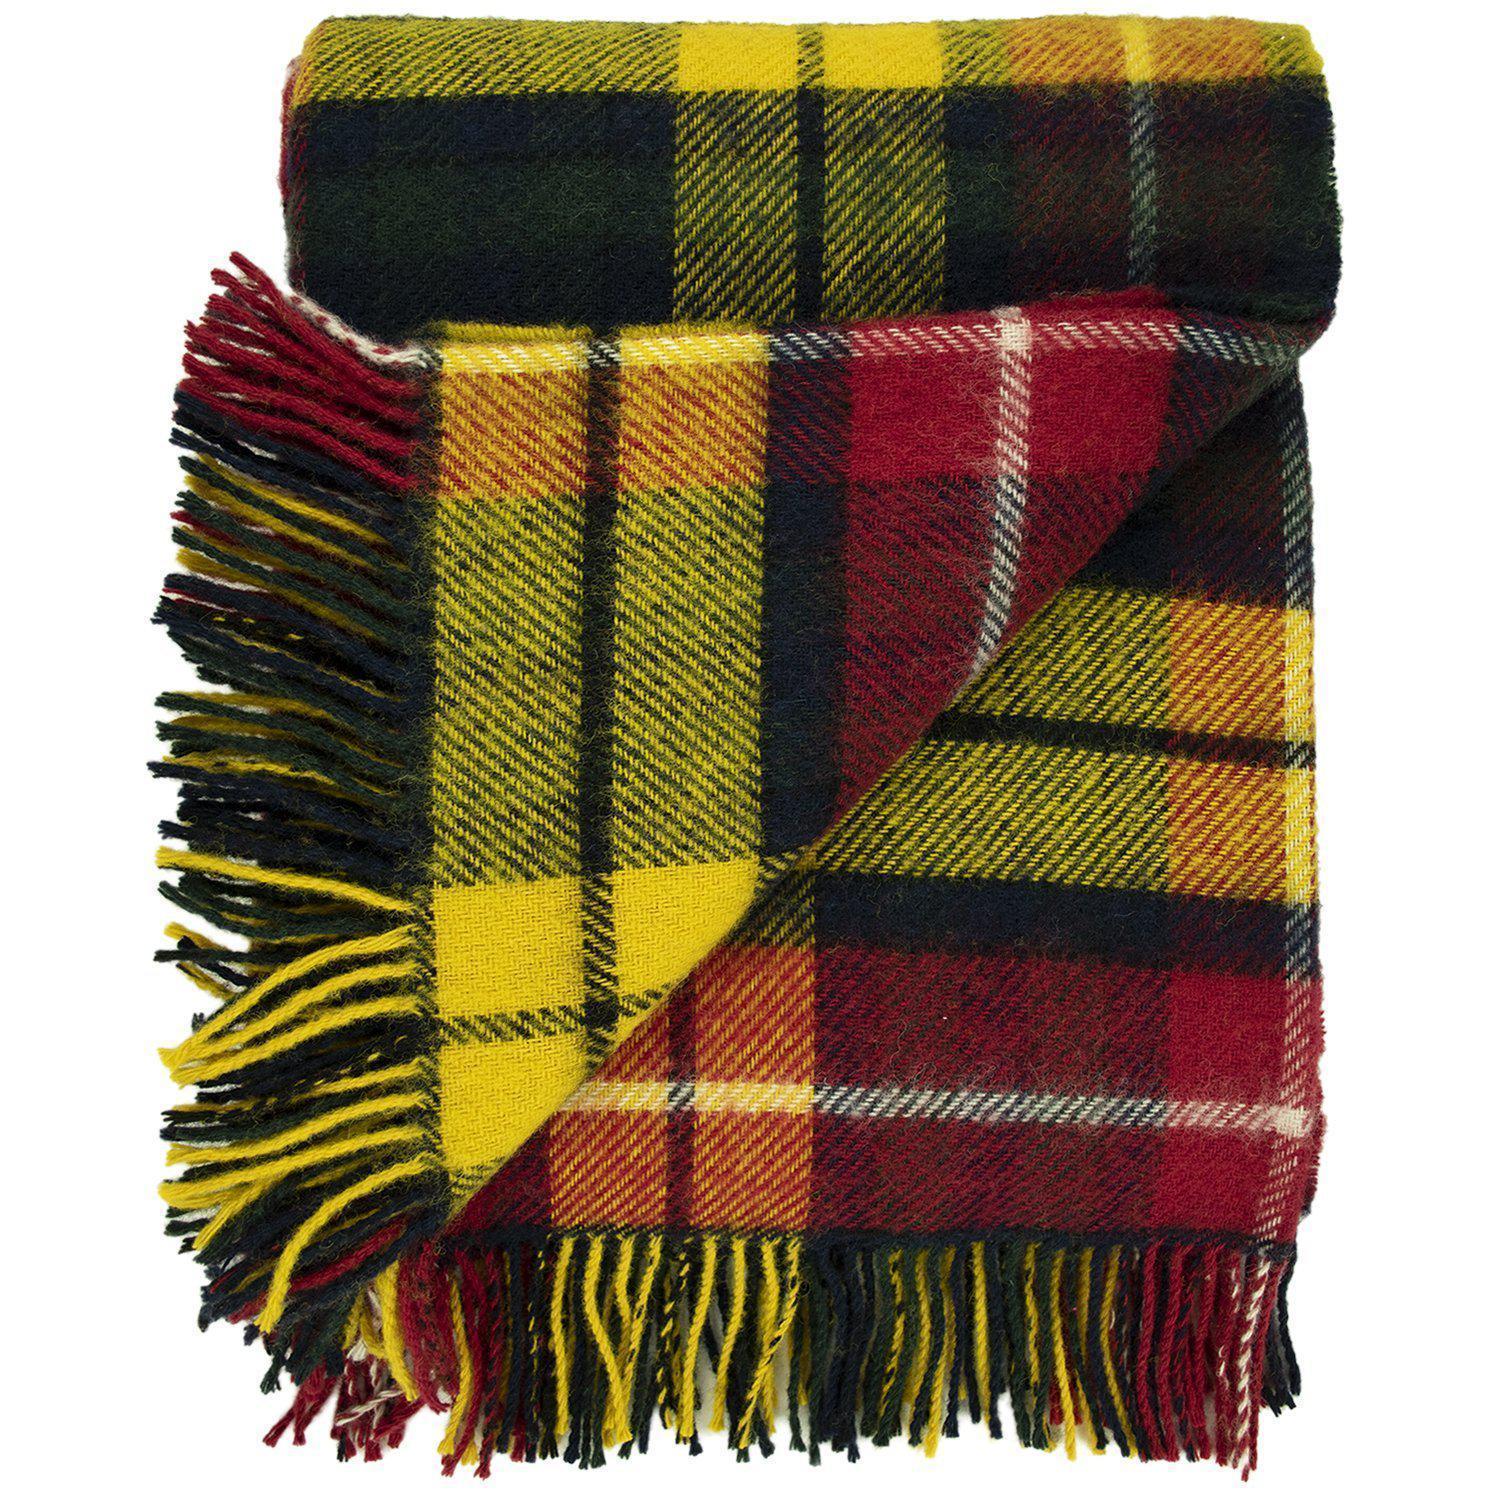 Prince of Scots Highland Tweed Pure New Wool Throw (Buchanan)-Throws and Blankets-Prince of Scots-810032752040-J4050028-002-Prince of Scots